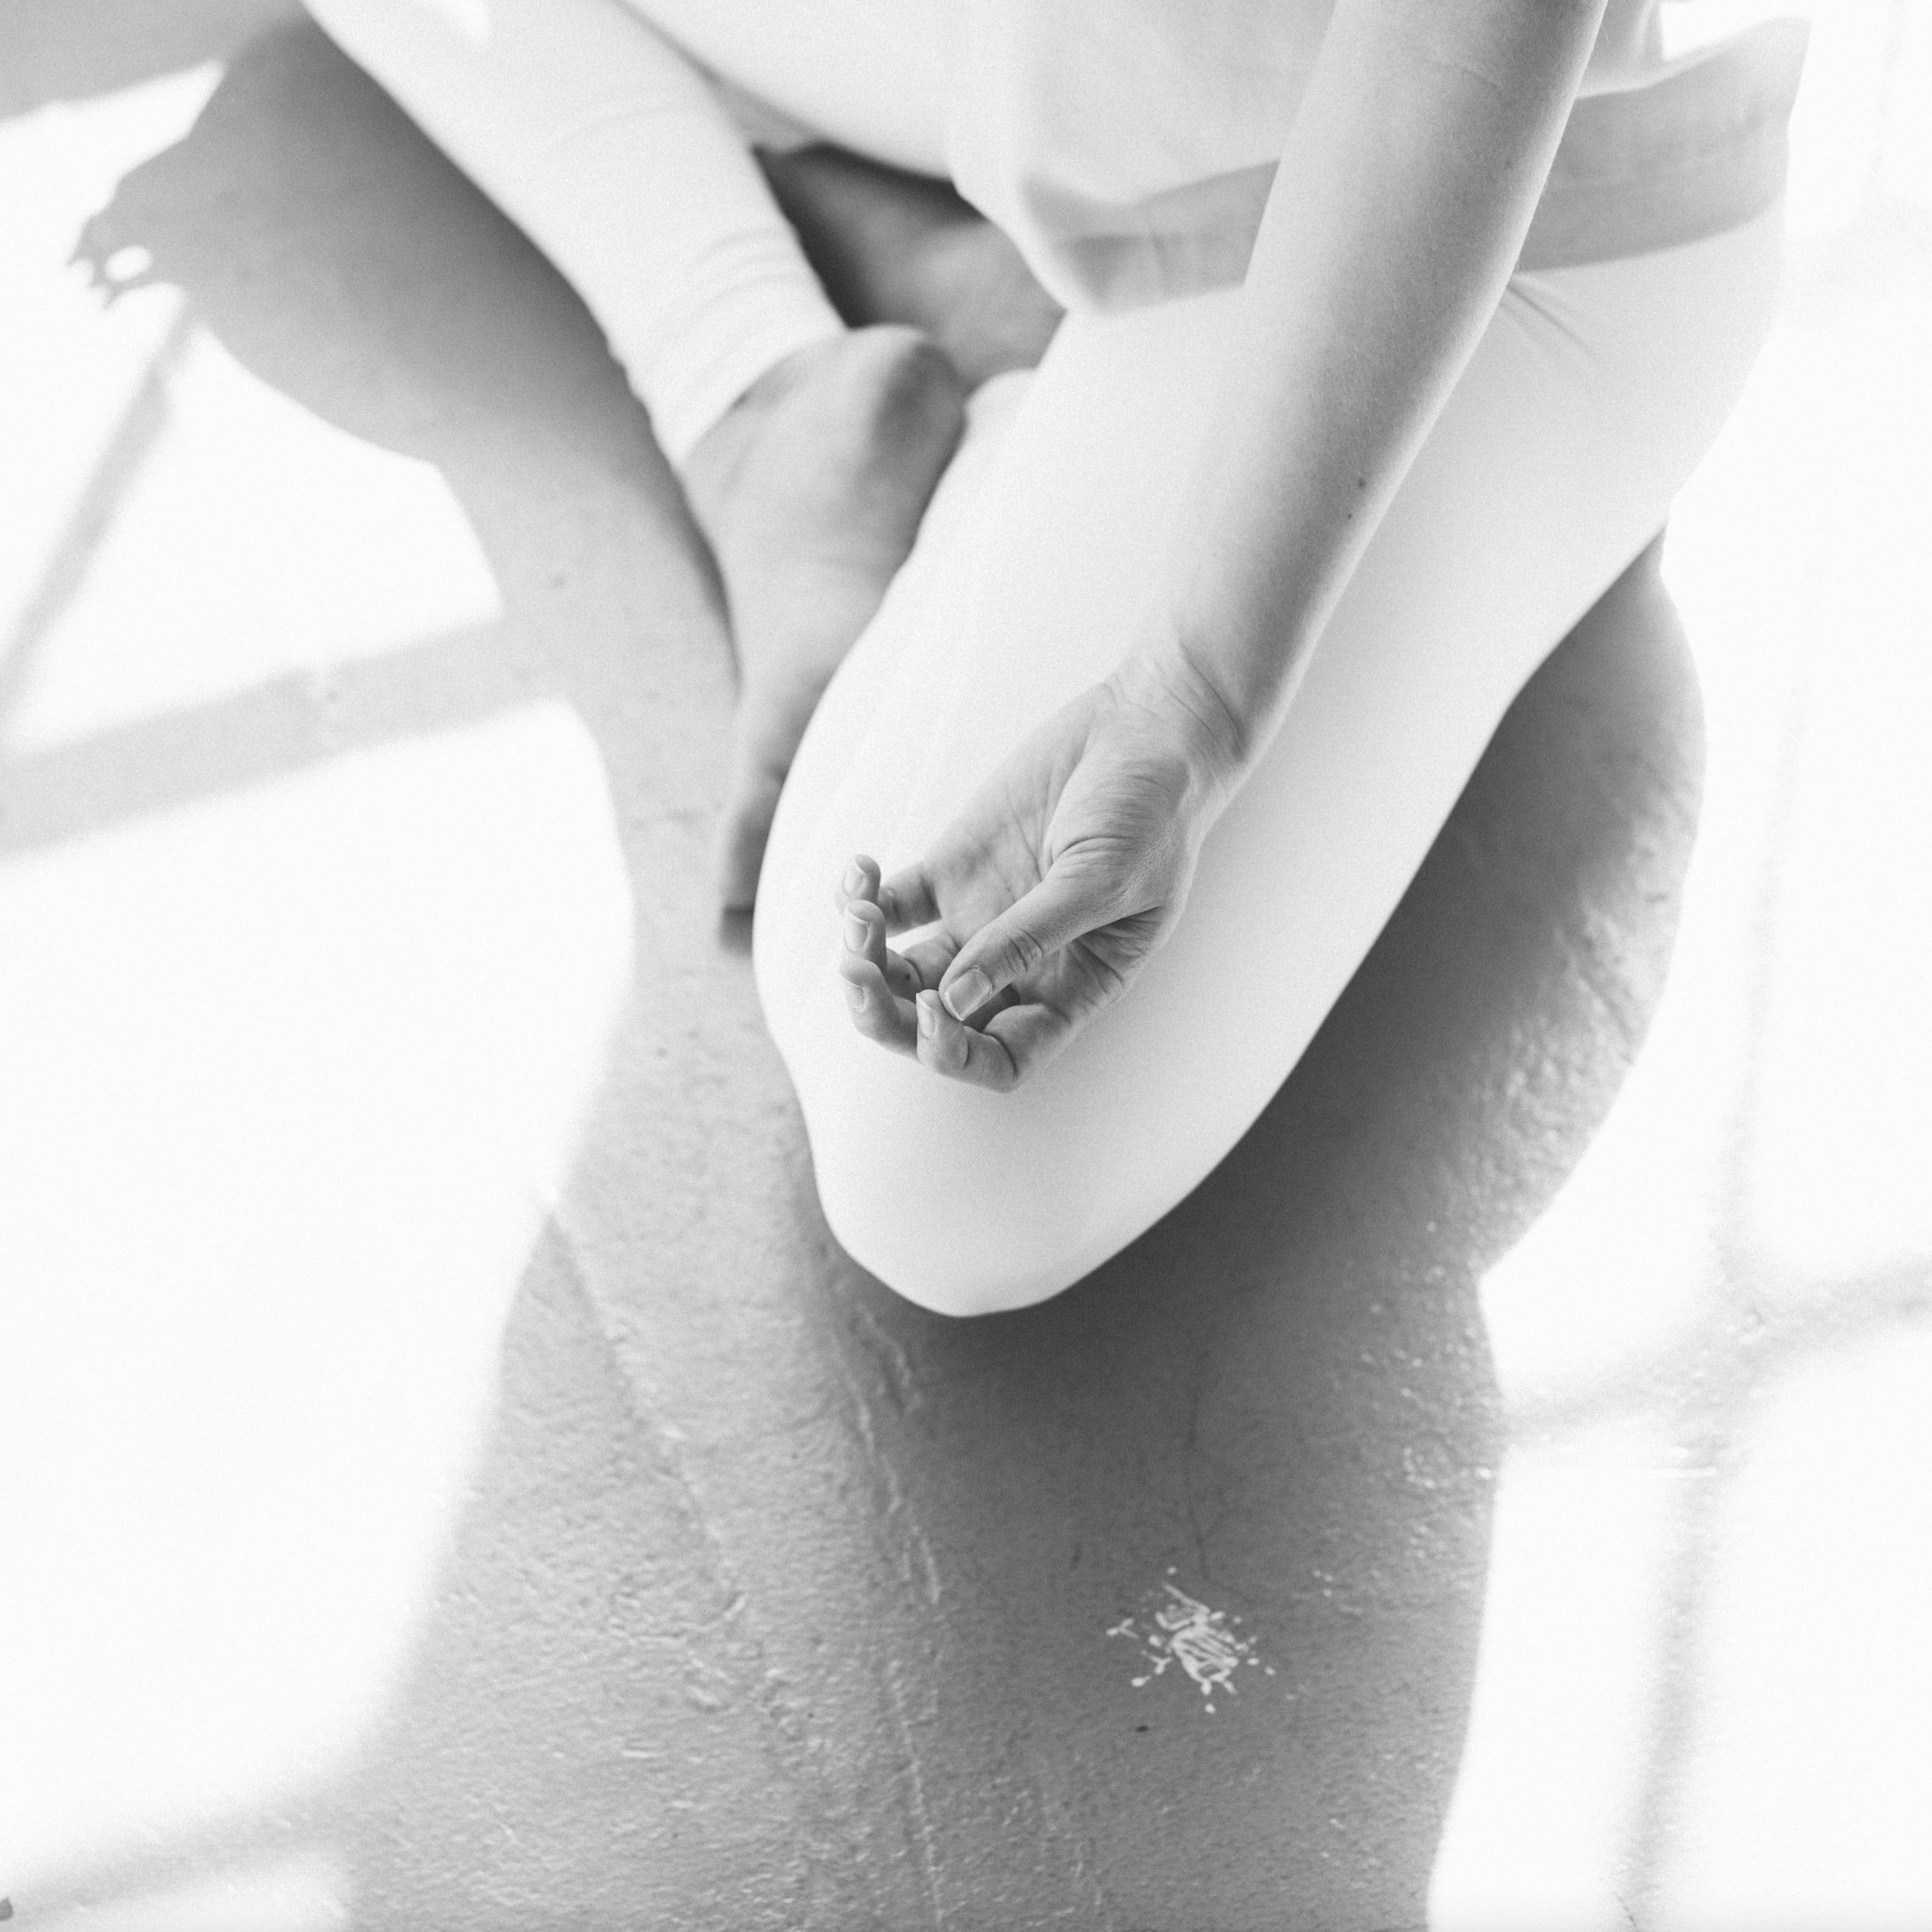 black and white image of cross-legged seat with woman's hand in yoga mudra, shadows of window panes reflected on floor